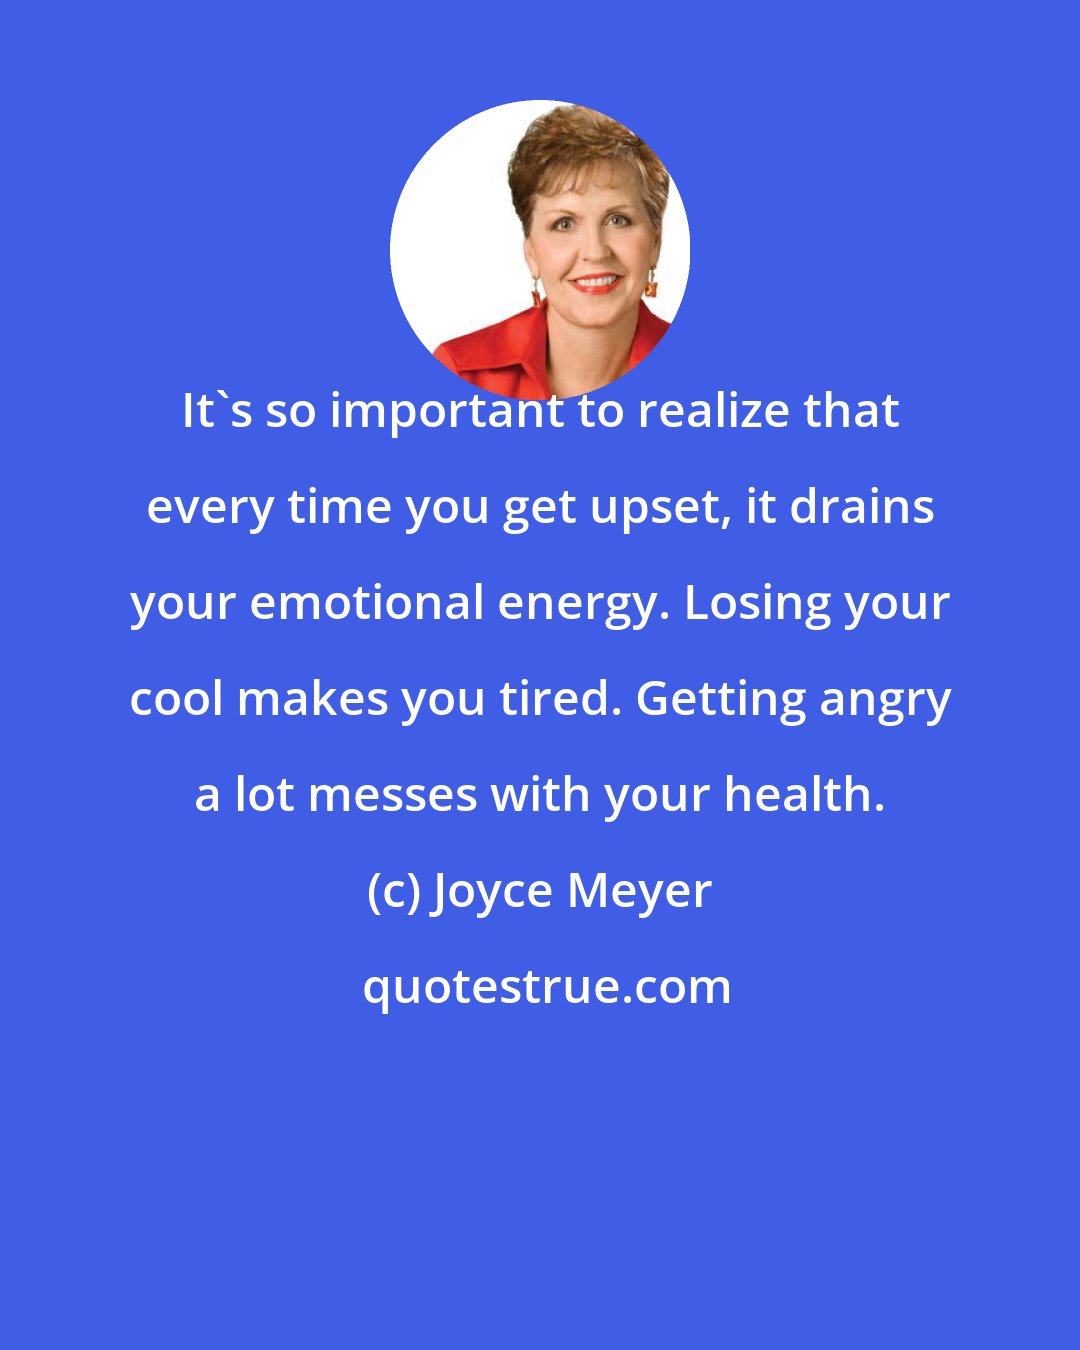 Joyce Meyer: It's so important to realize that every time you get upset, it drains your emotional energy. Losing your cool makes you tired. Getting angry a lot messes with your health.